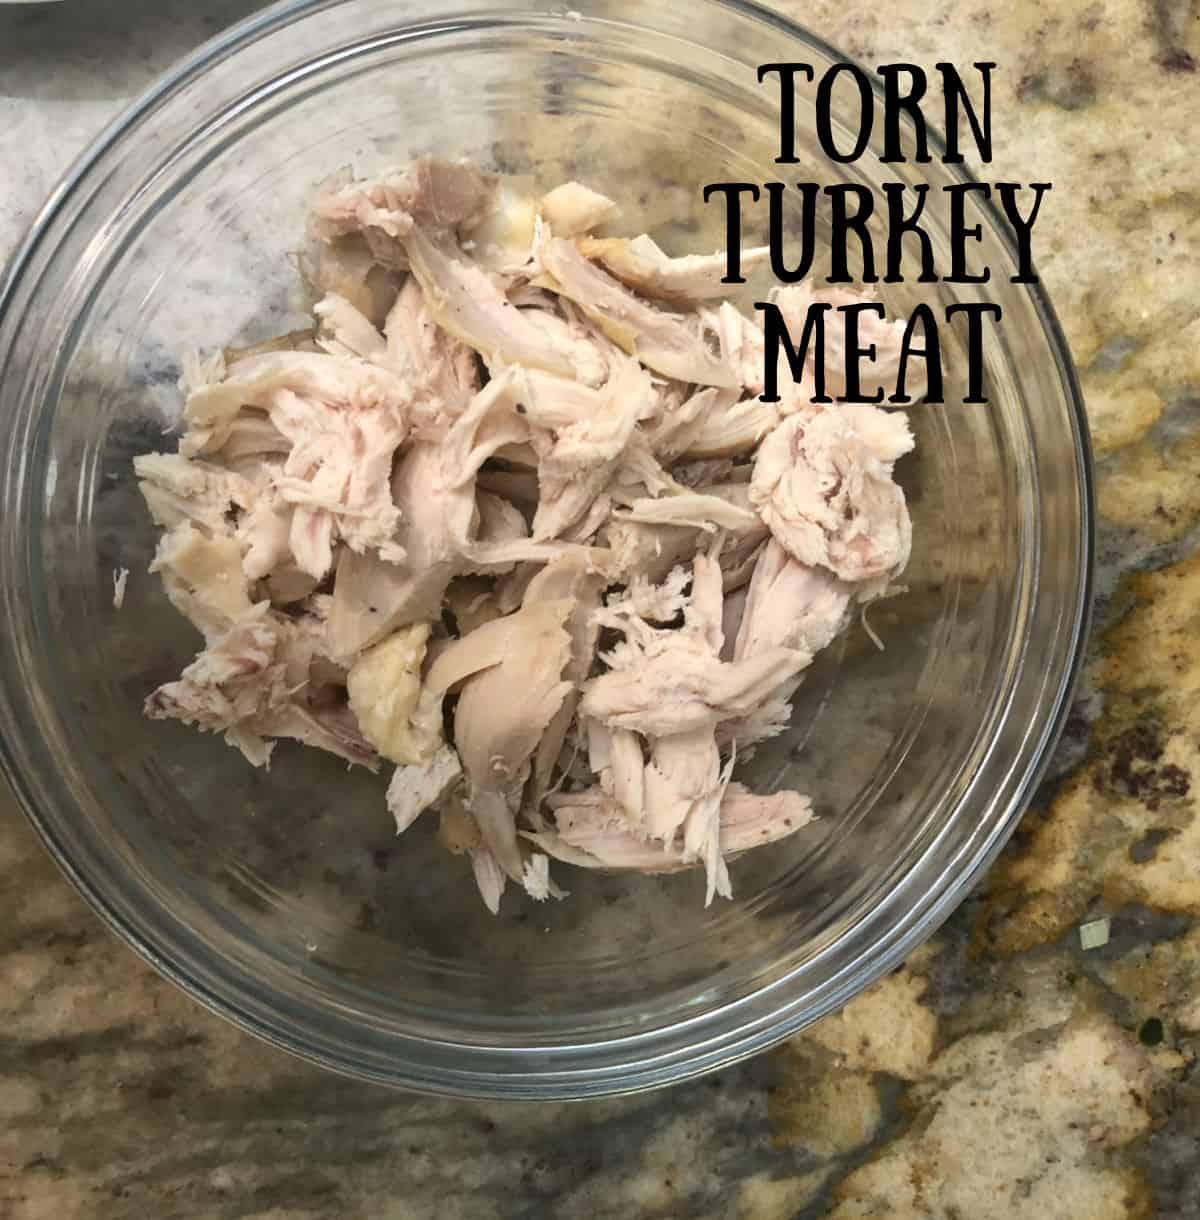 A bowl of torn turkey meat.